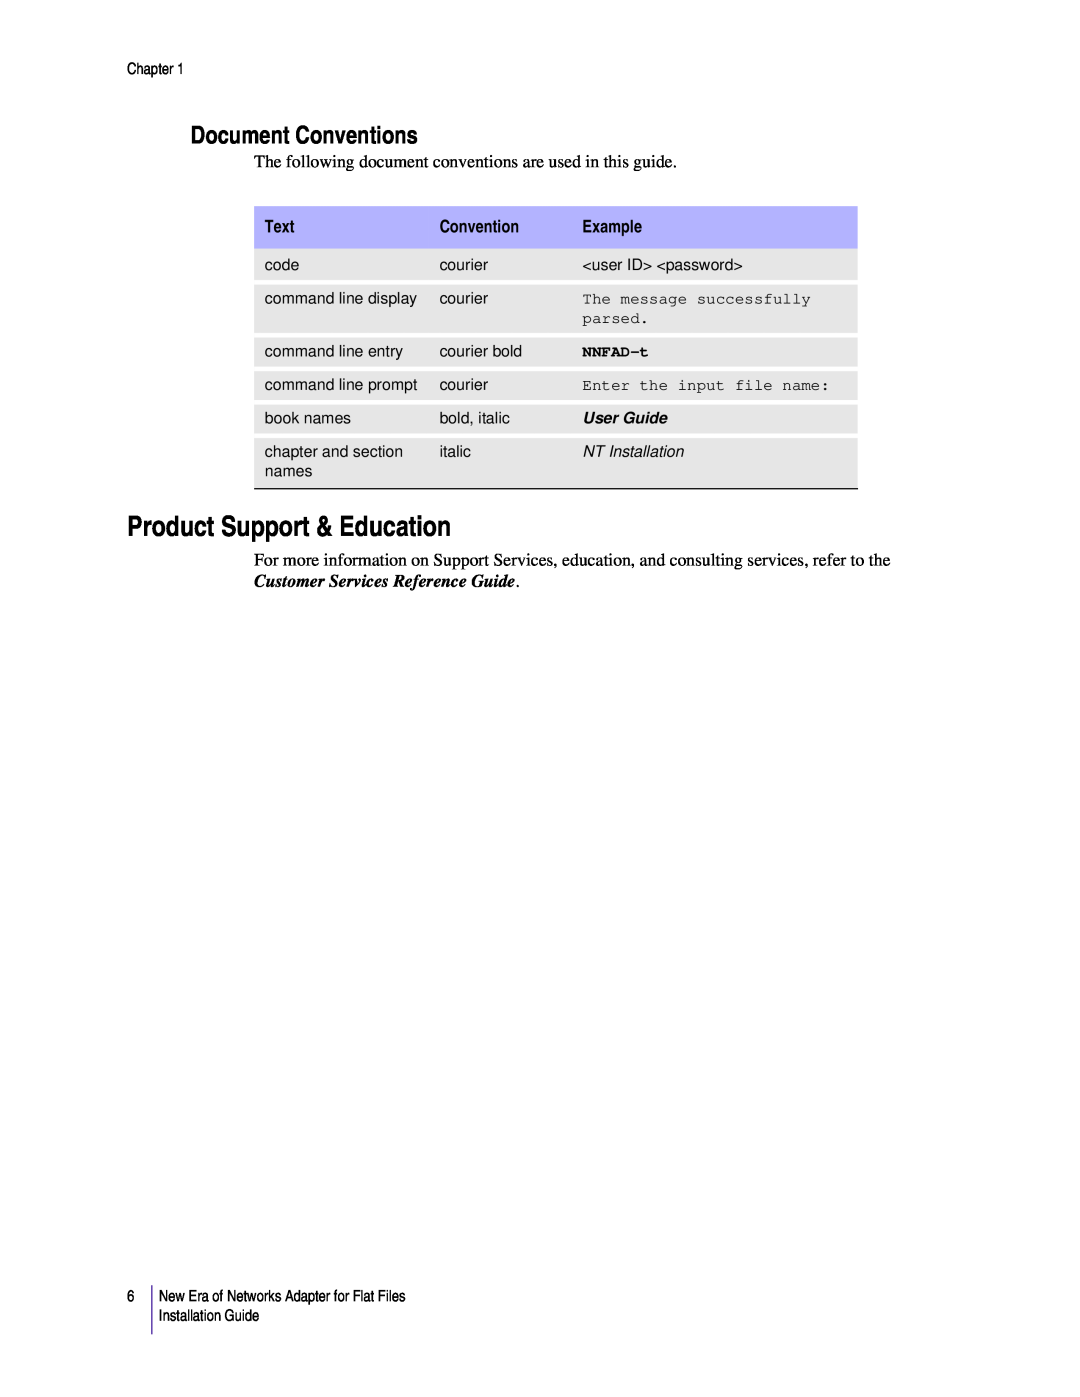 Sybase 3.8 manual Product Support & Education, Document Conventions, NNFAD-t, User Guide 